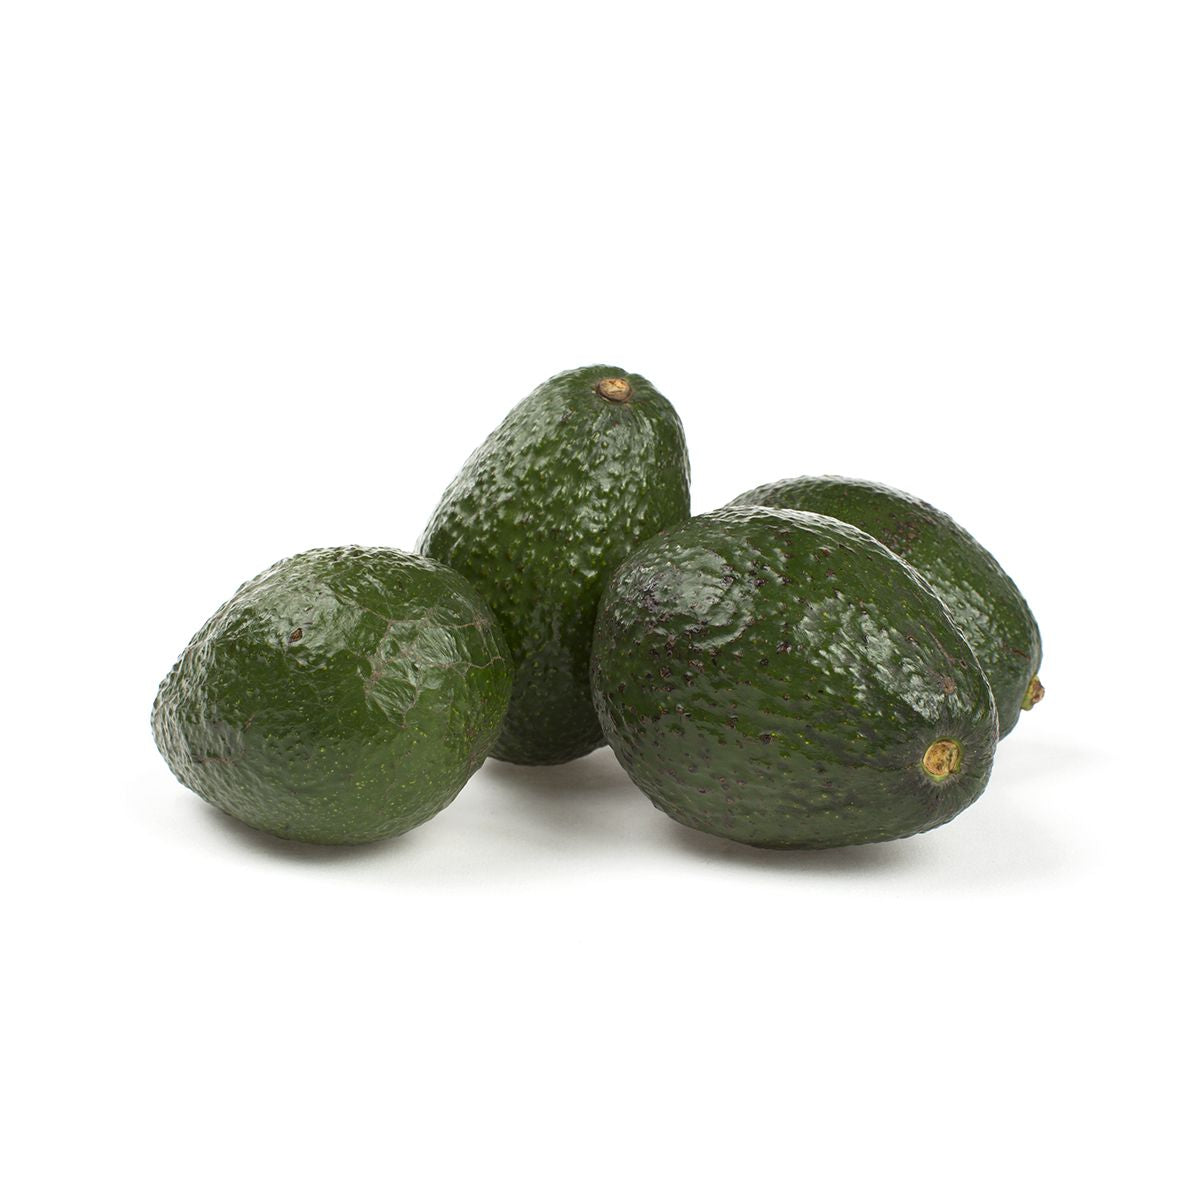 Avocados From Mexico Firm Hass Avocados 48 Ct